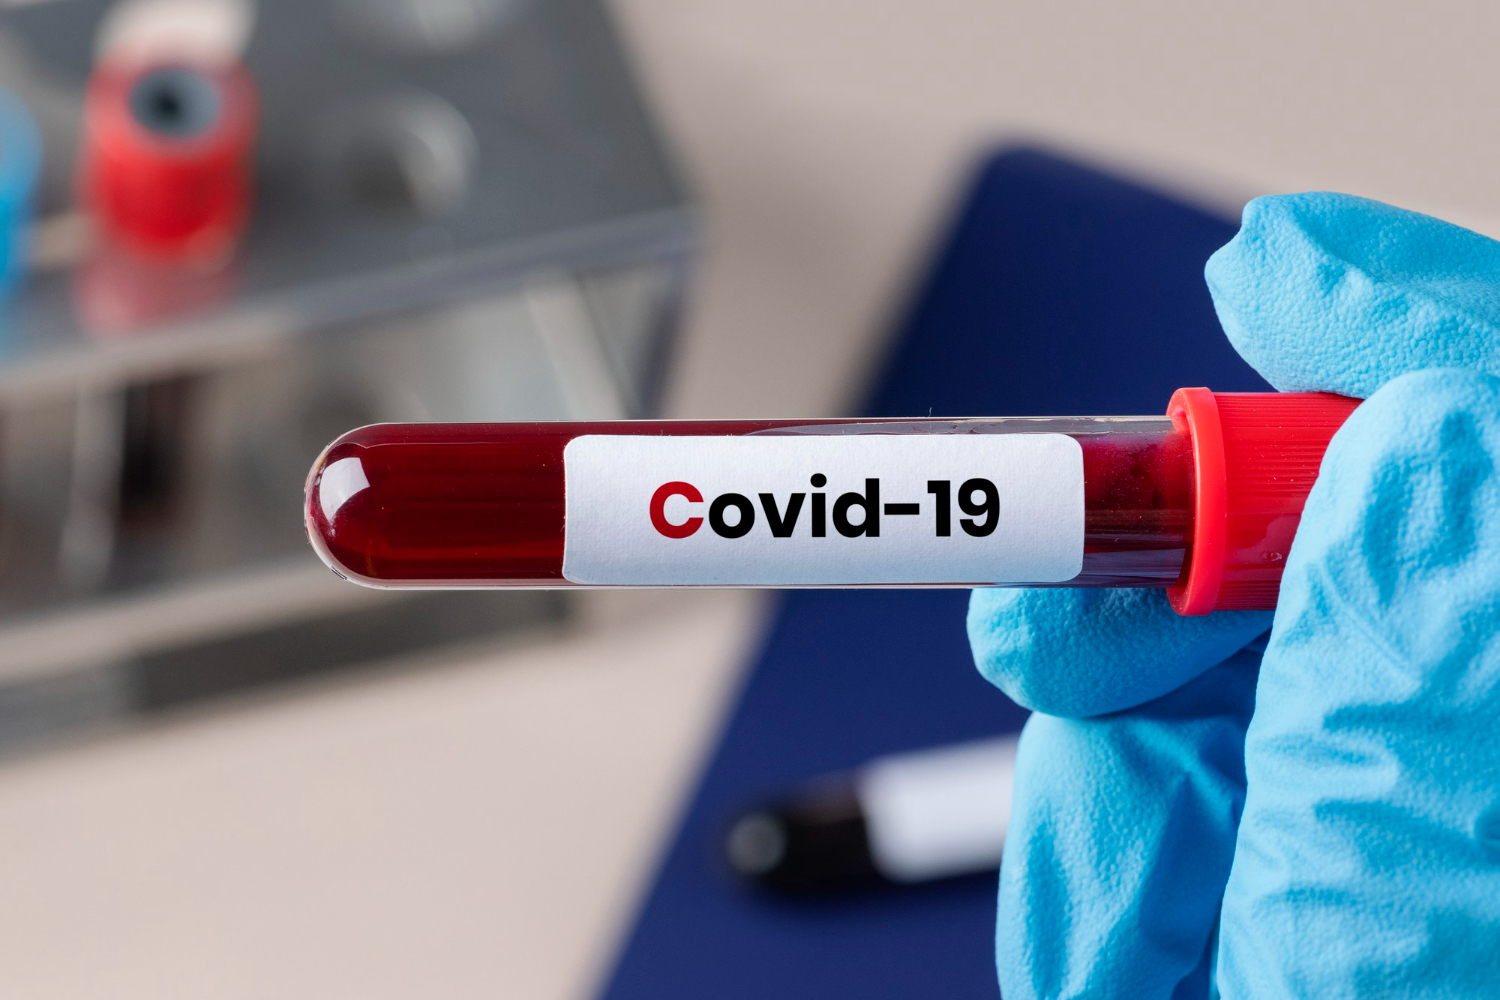 Individual COVID-19 infections include multiple variants of the SARS-CoV-2 virus, research shows